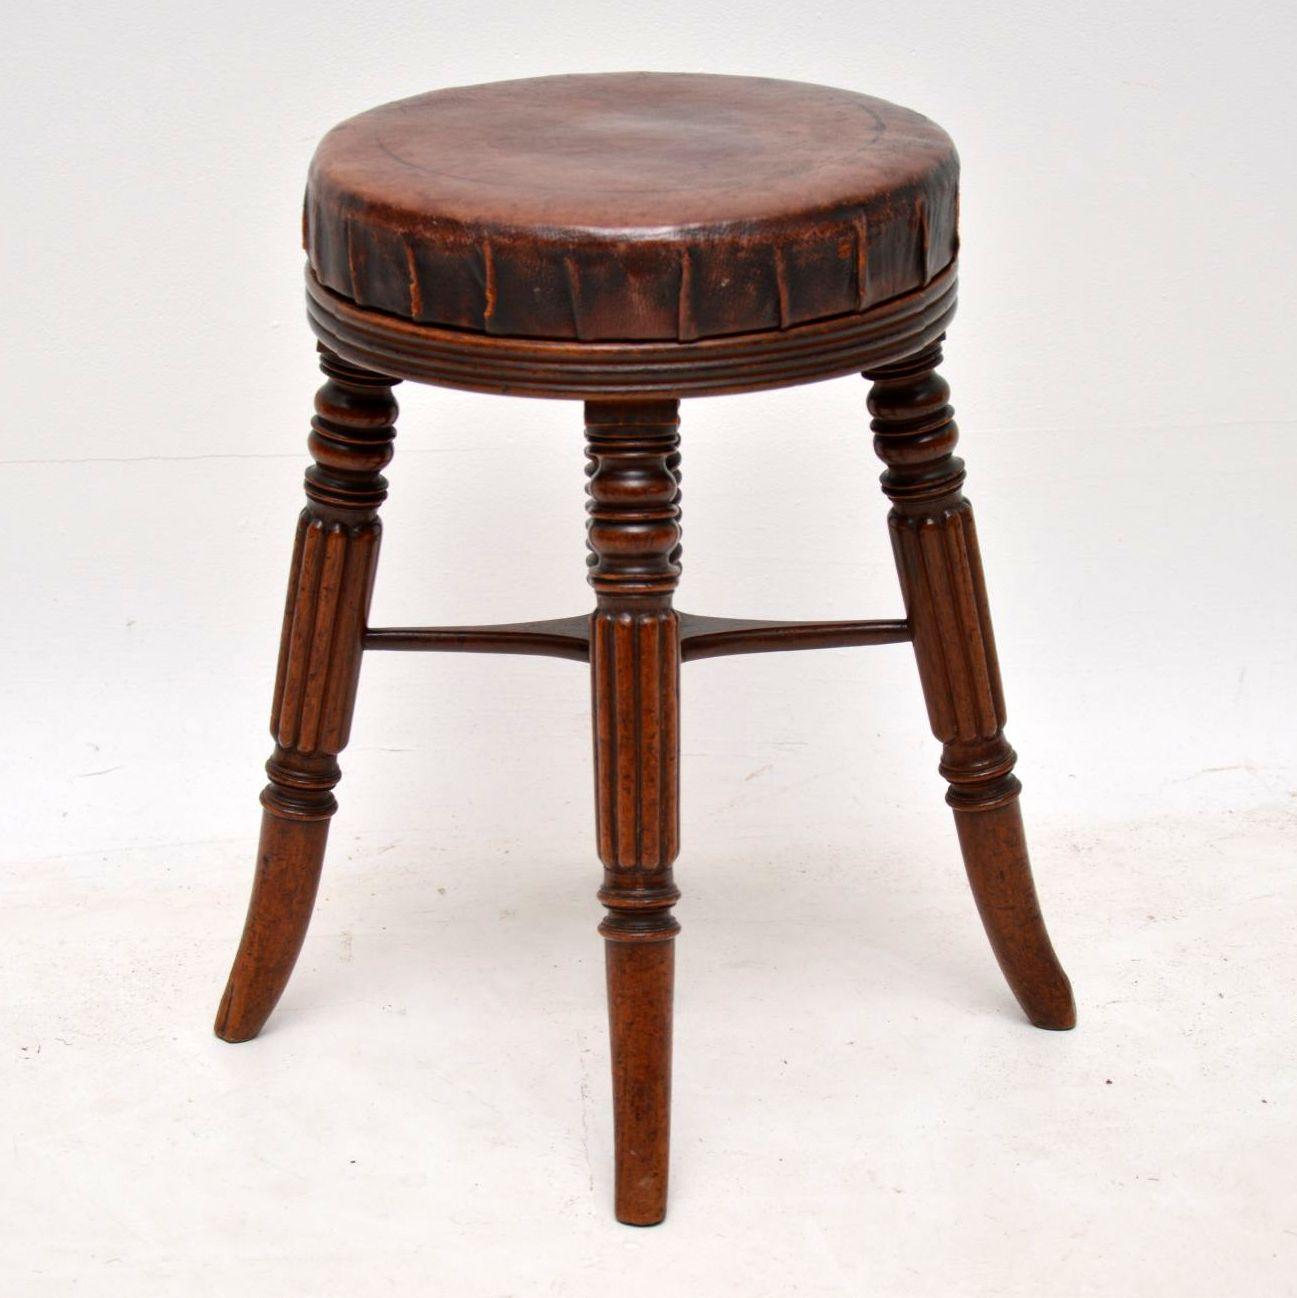 English Antique Victorian Mahogany and Leather Adjustable Piano Stool